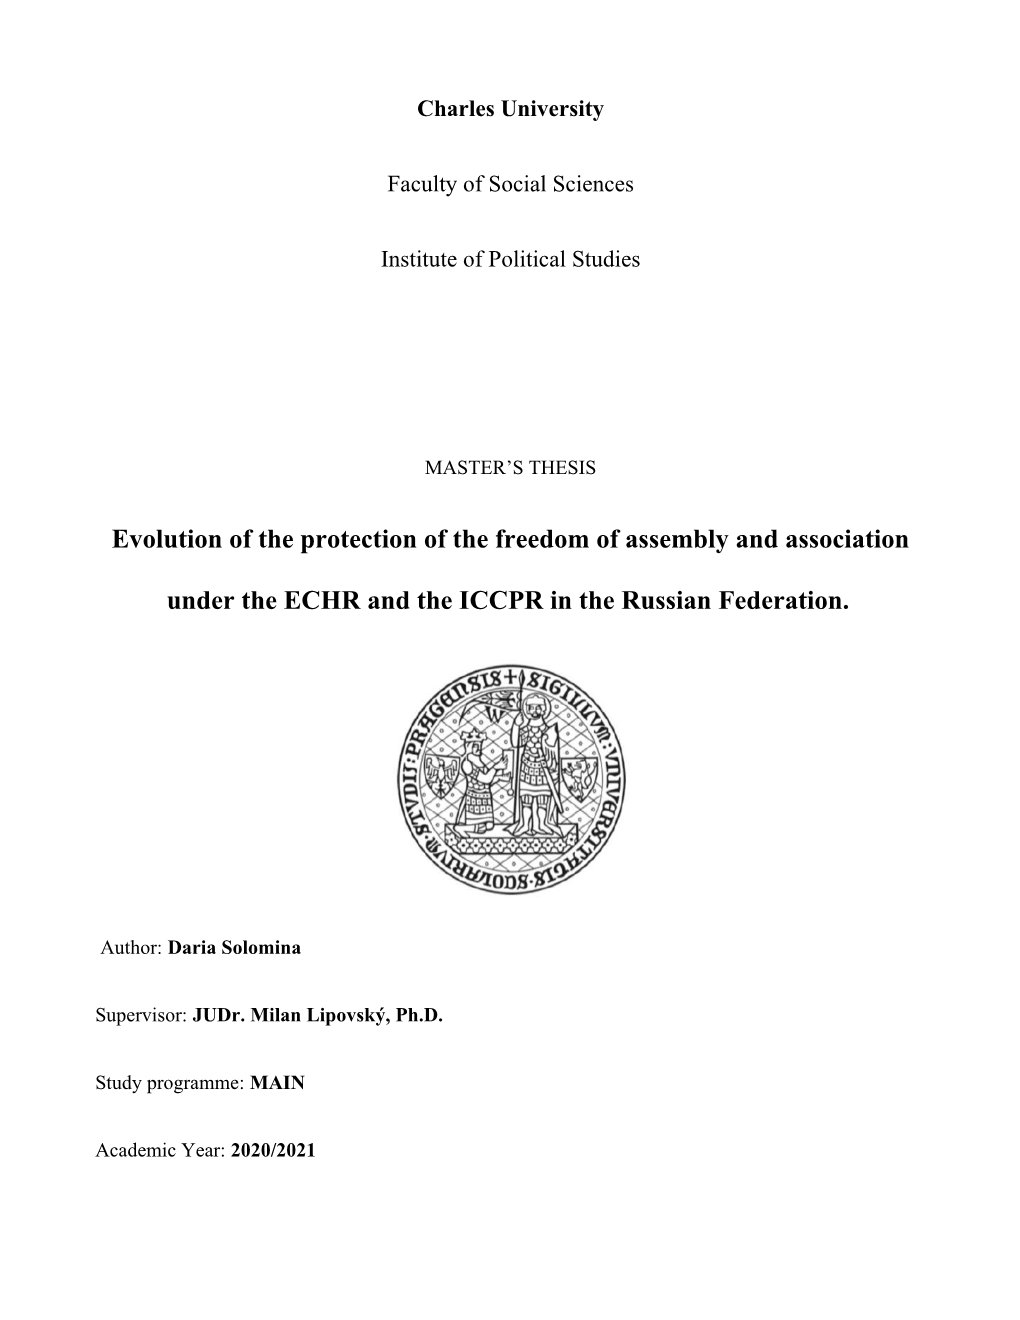 Evolution of the Protection of the Freedom of Assembly and Association Under the ECHR and the ICCPR in the Russian Federation